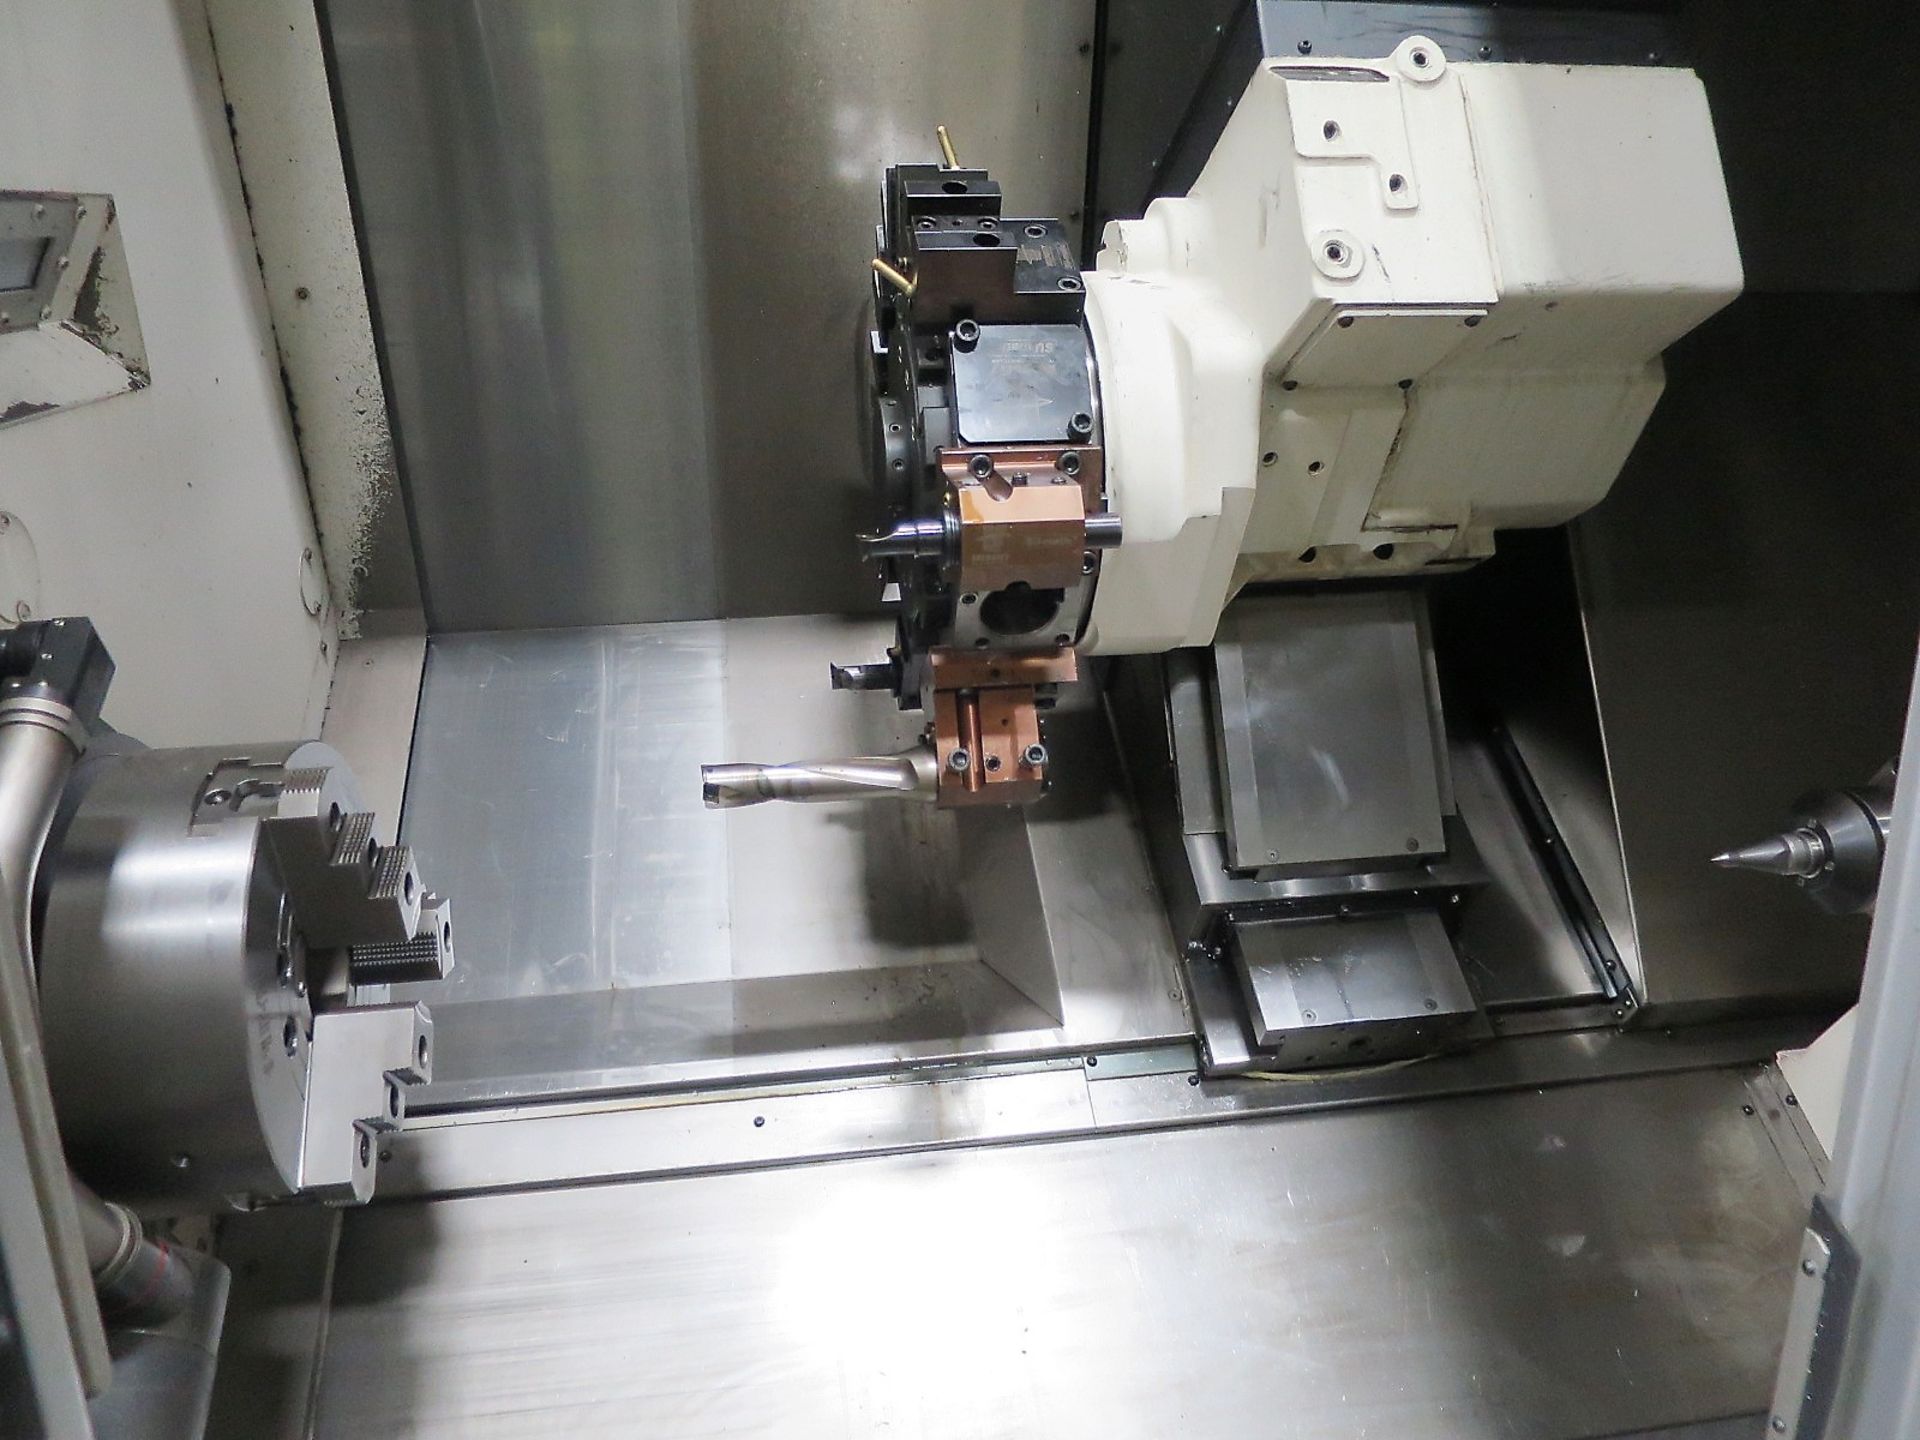 Okuma LB3000EXII MY BB 950 CNC Turning Center Lathe W/Live Tooling & Y-Axis Milling, S/N 206472, - Image 3 of 12